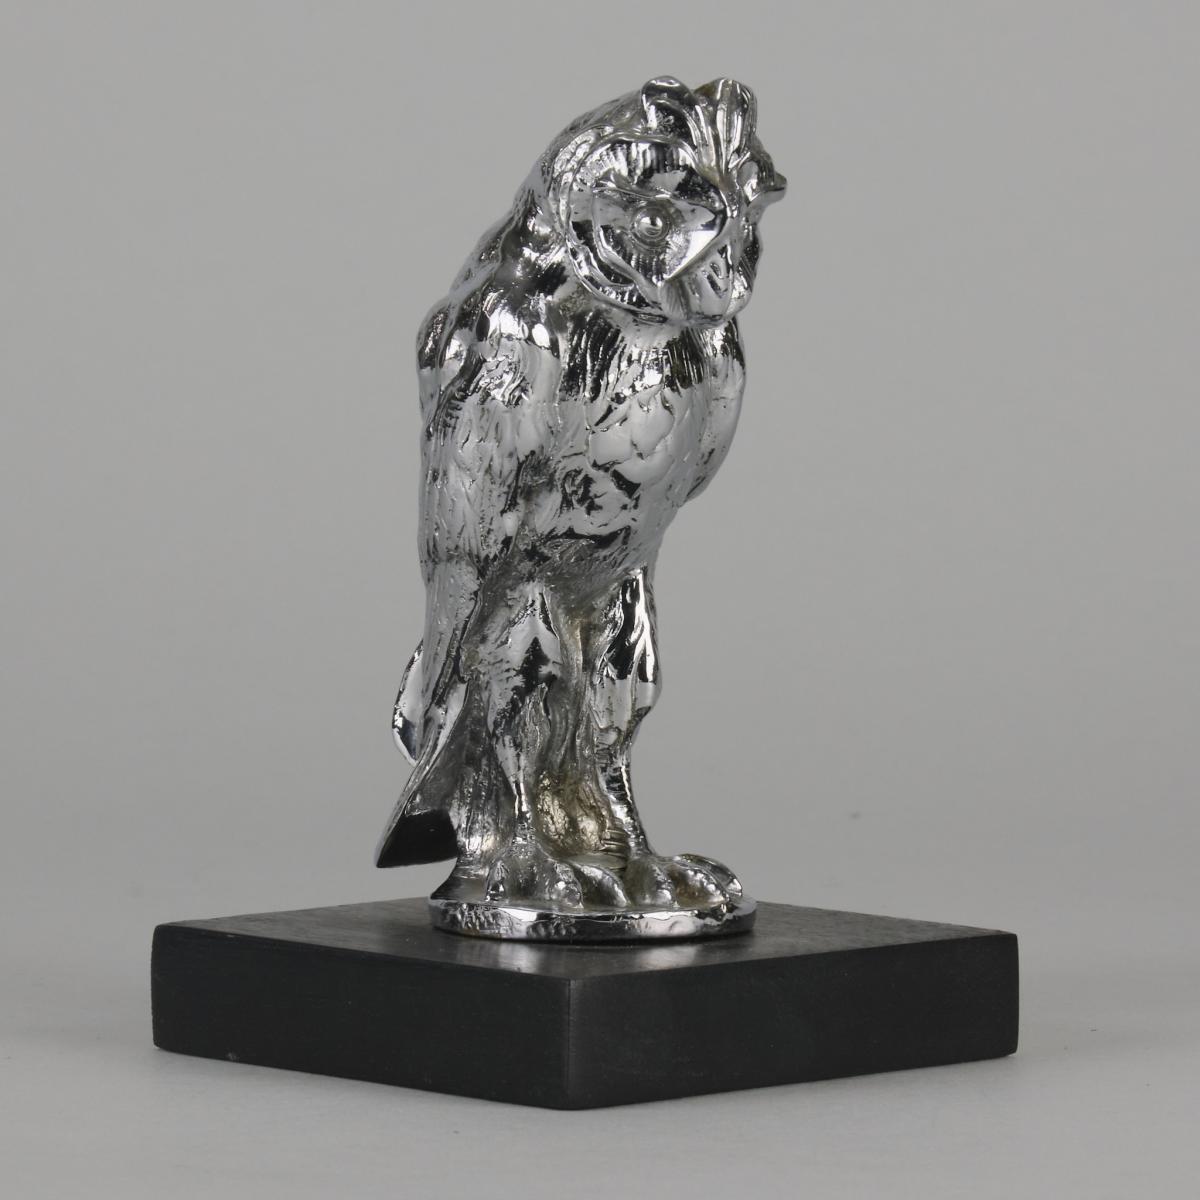 Nickel Plated Car Mascot entitled "Standing Owl"